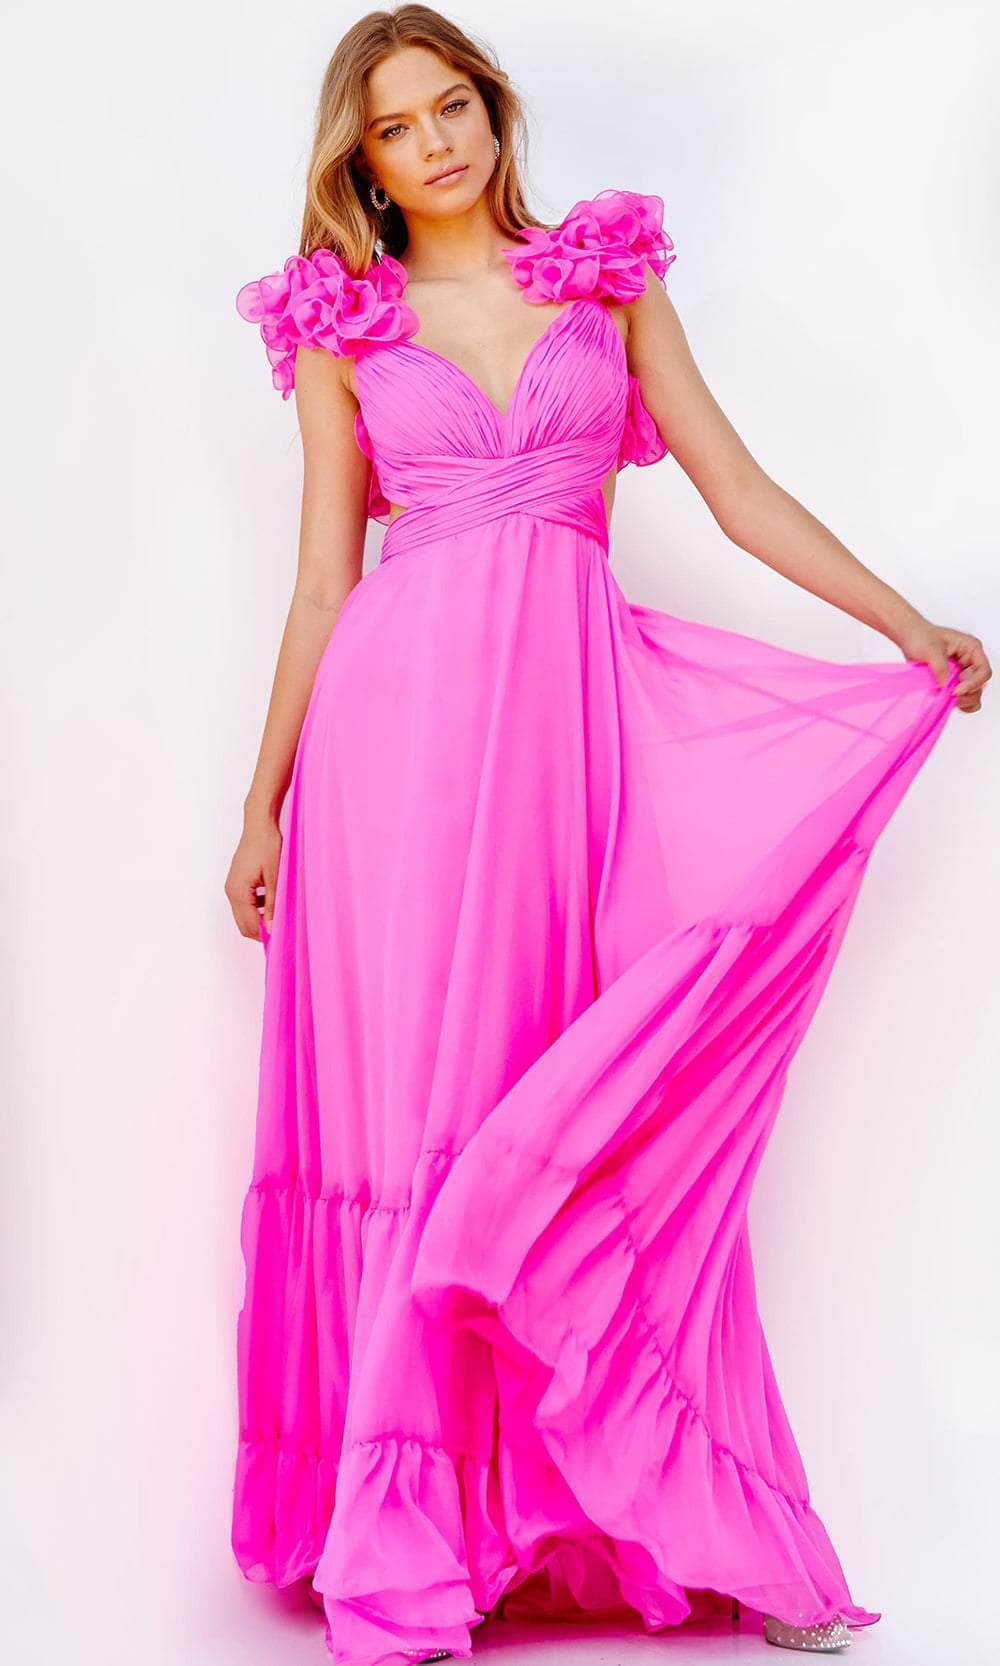 Jovani 23322 - Ruffled Shoulder A-Line Prom Dress Special Occasion Dress 00 / Hot-Pink